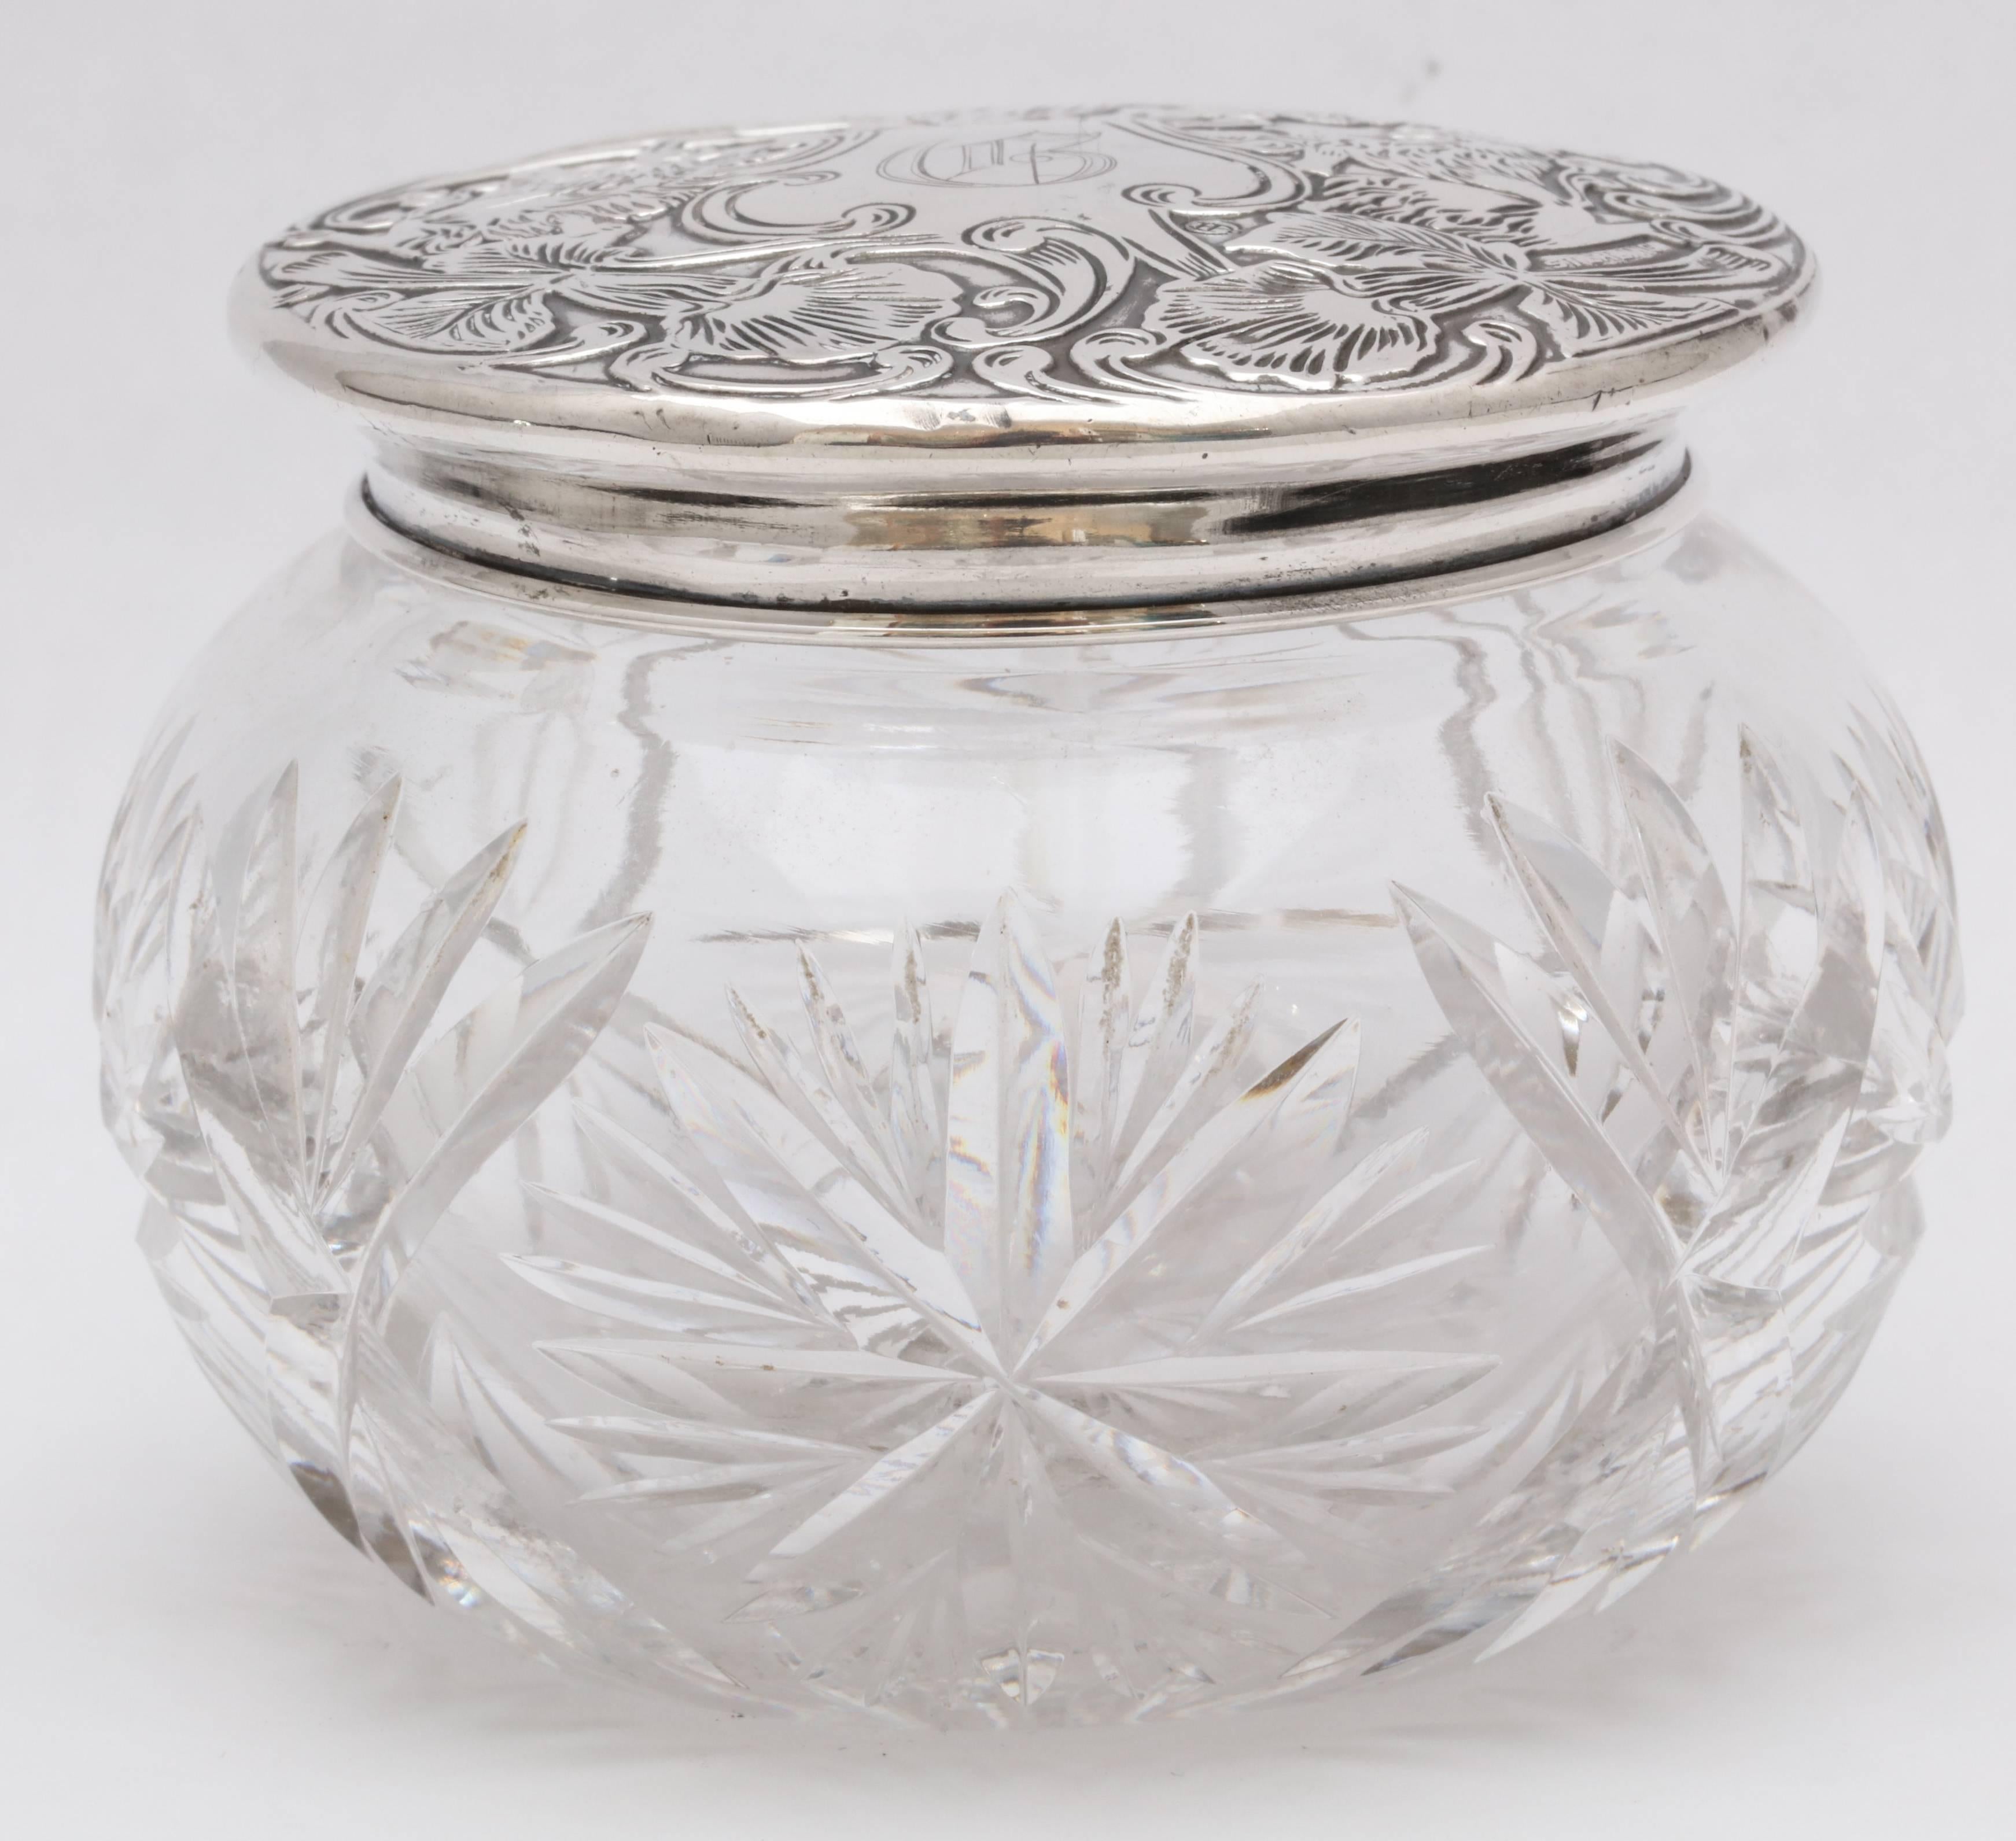 Unusual, Art Nouveau, sterling silver-lidded, cut crystal powder jar, Eastwood-Park Co., Jew Jersey, circa 1909-1915. The lid has a motif of two lions rampant holding a central cartouche in the form of a shield. The cartouche is engraved with the